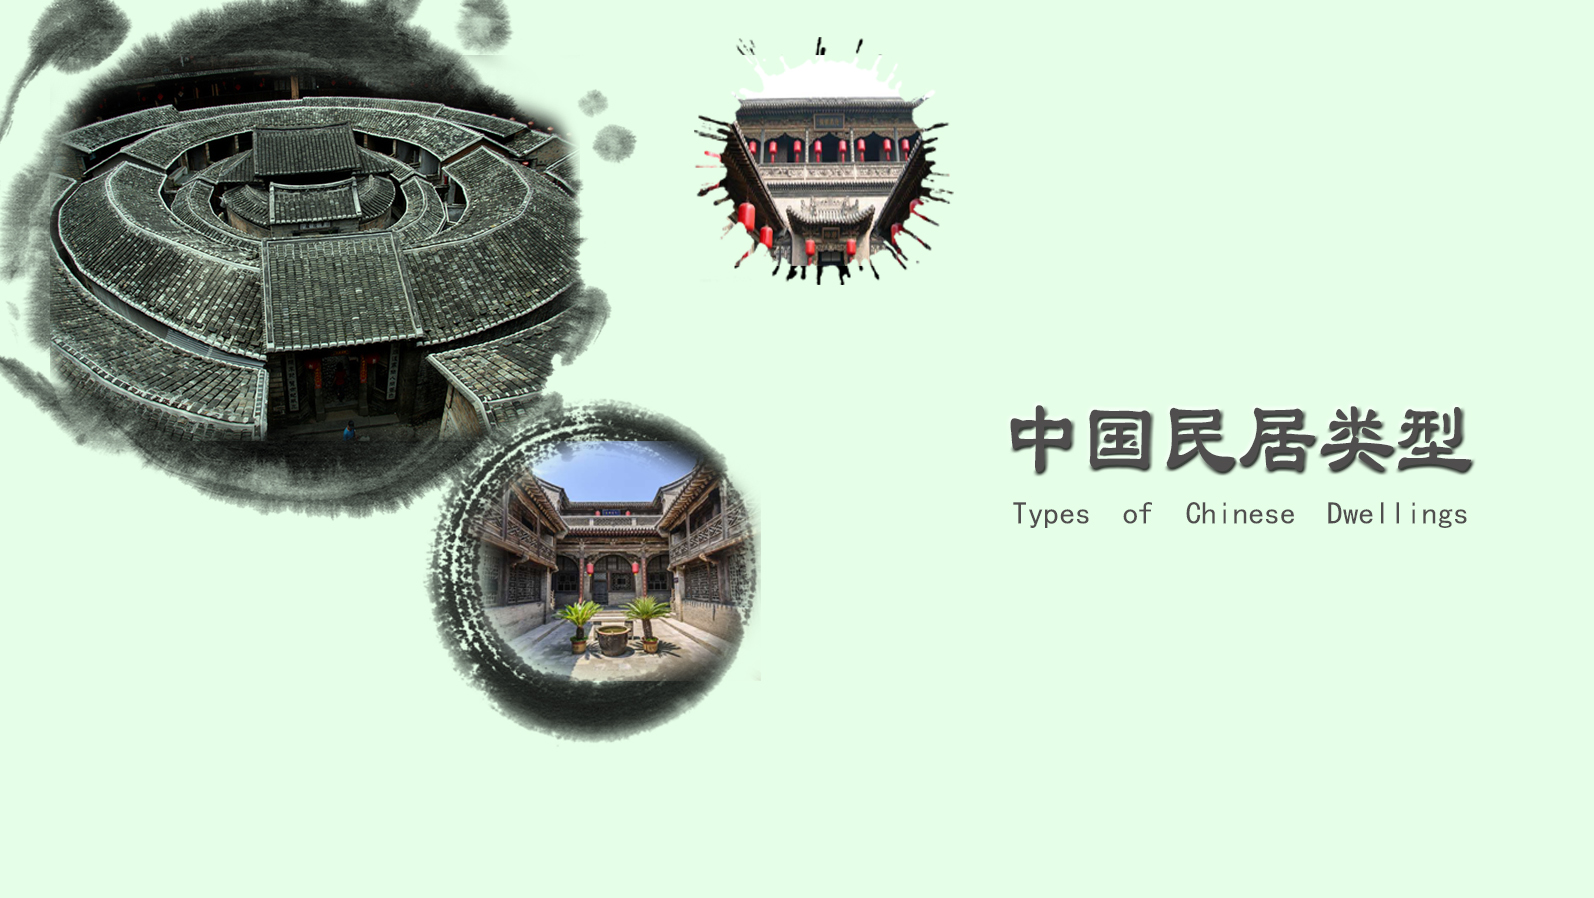 Types of Chinese Dwellings